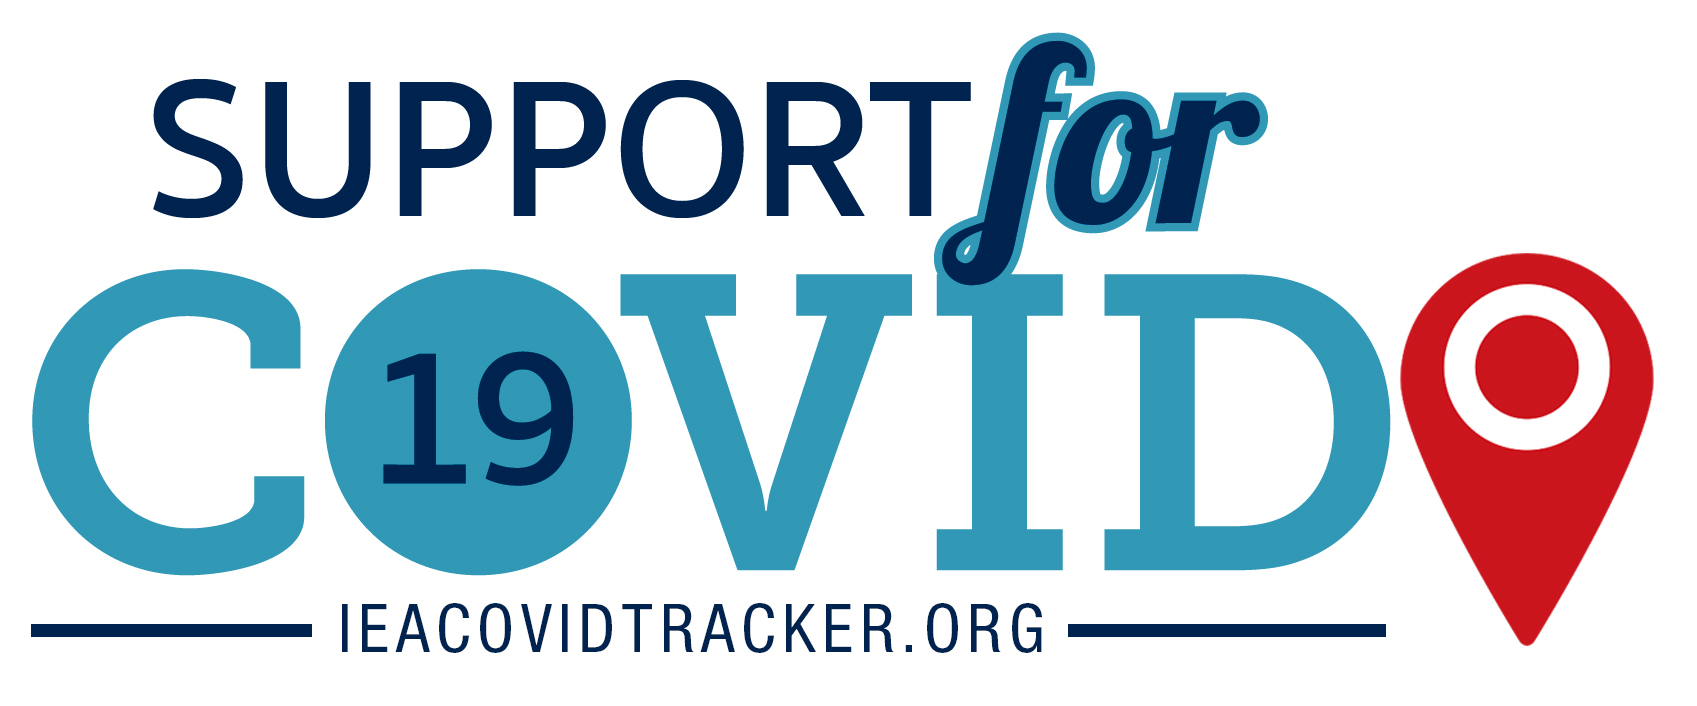 Support for Covid-19 - IEACovidTracker.org